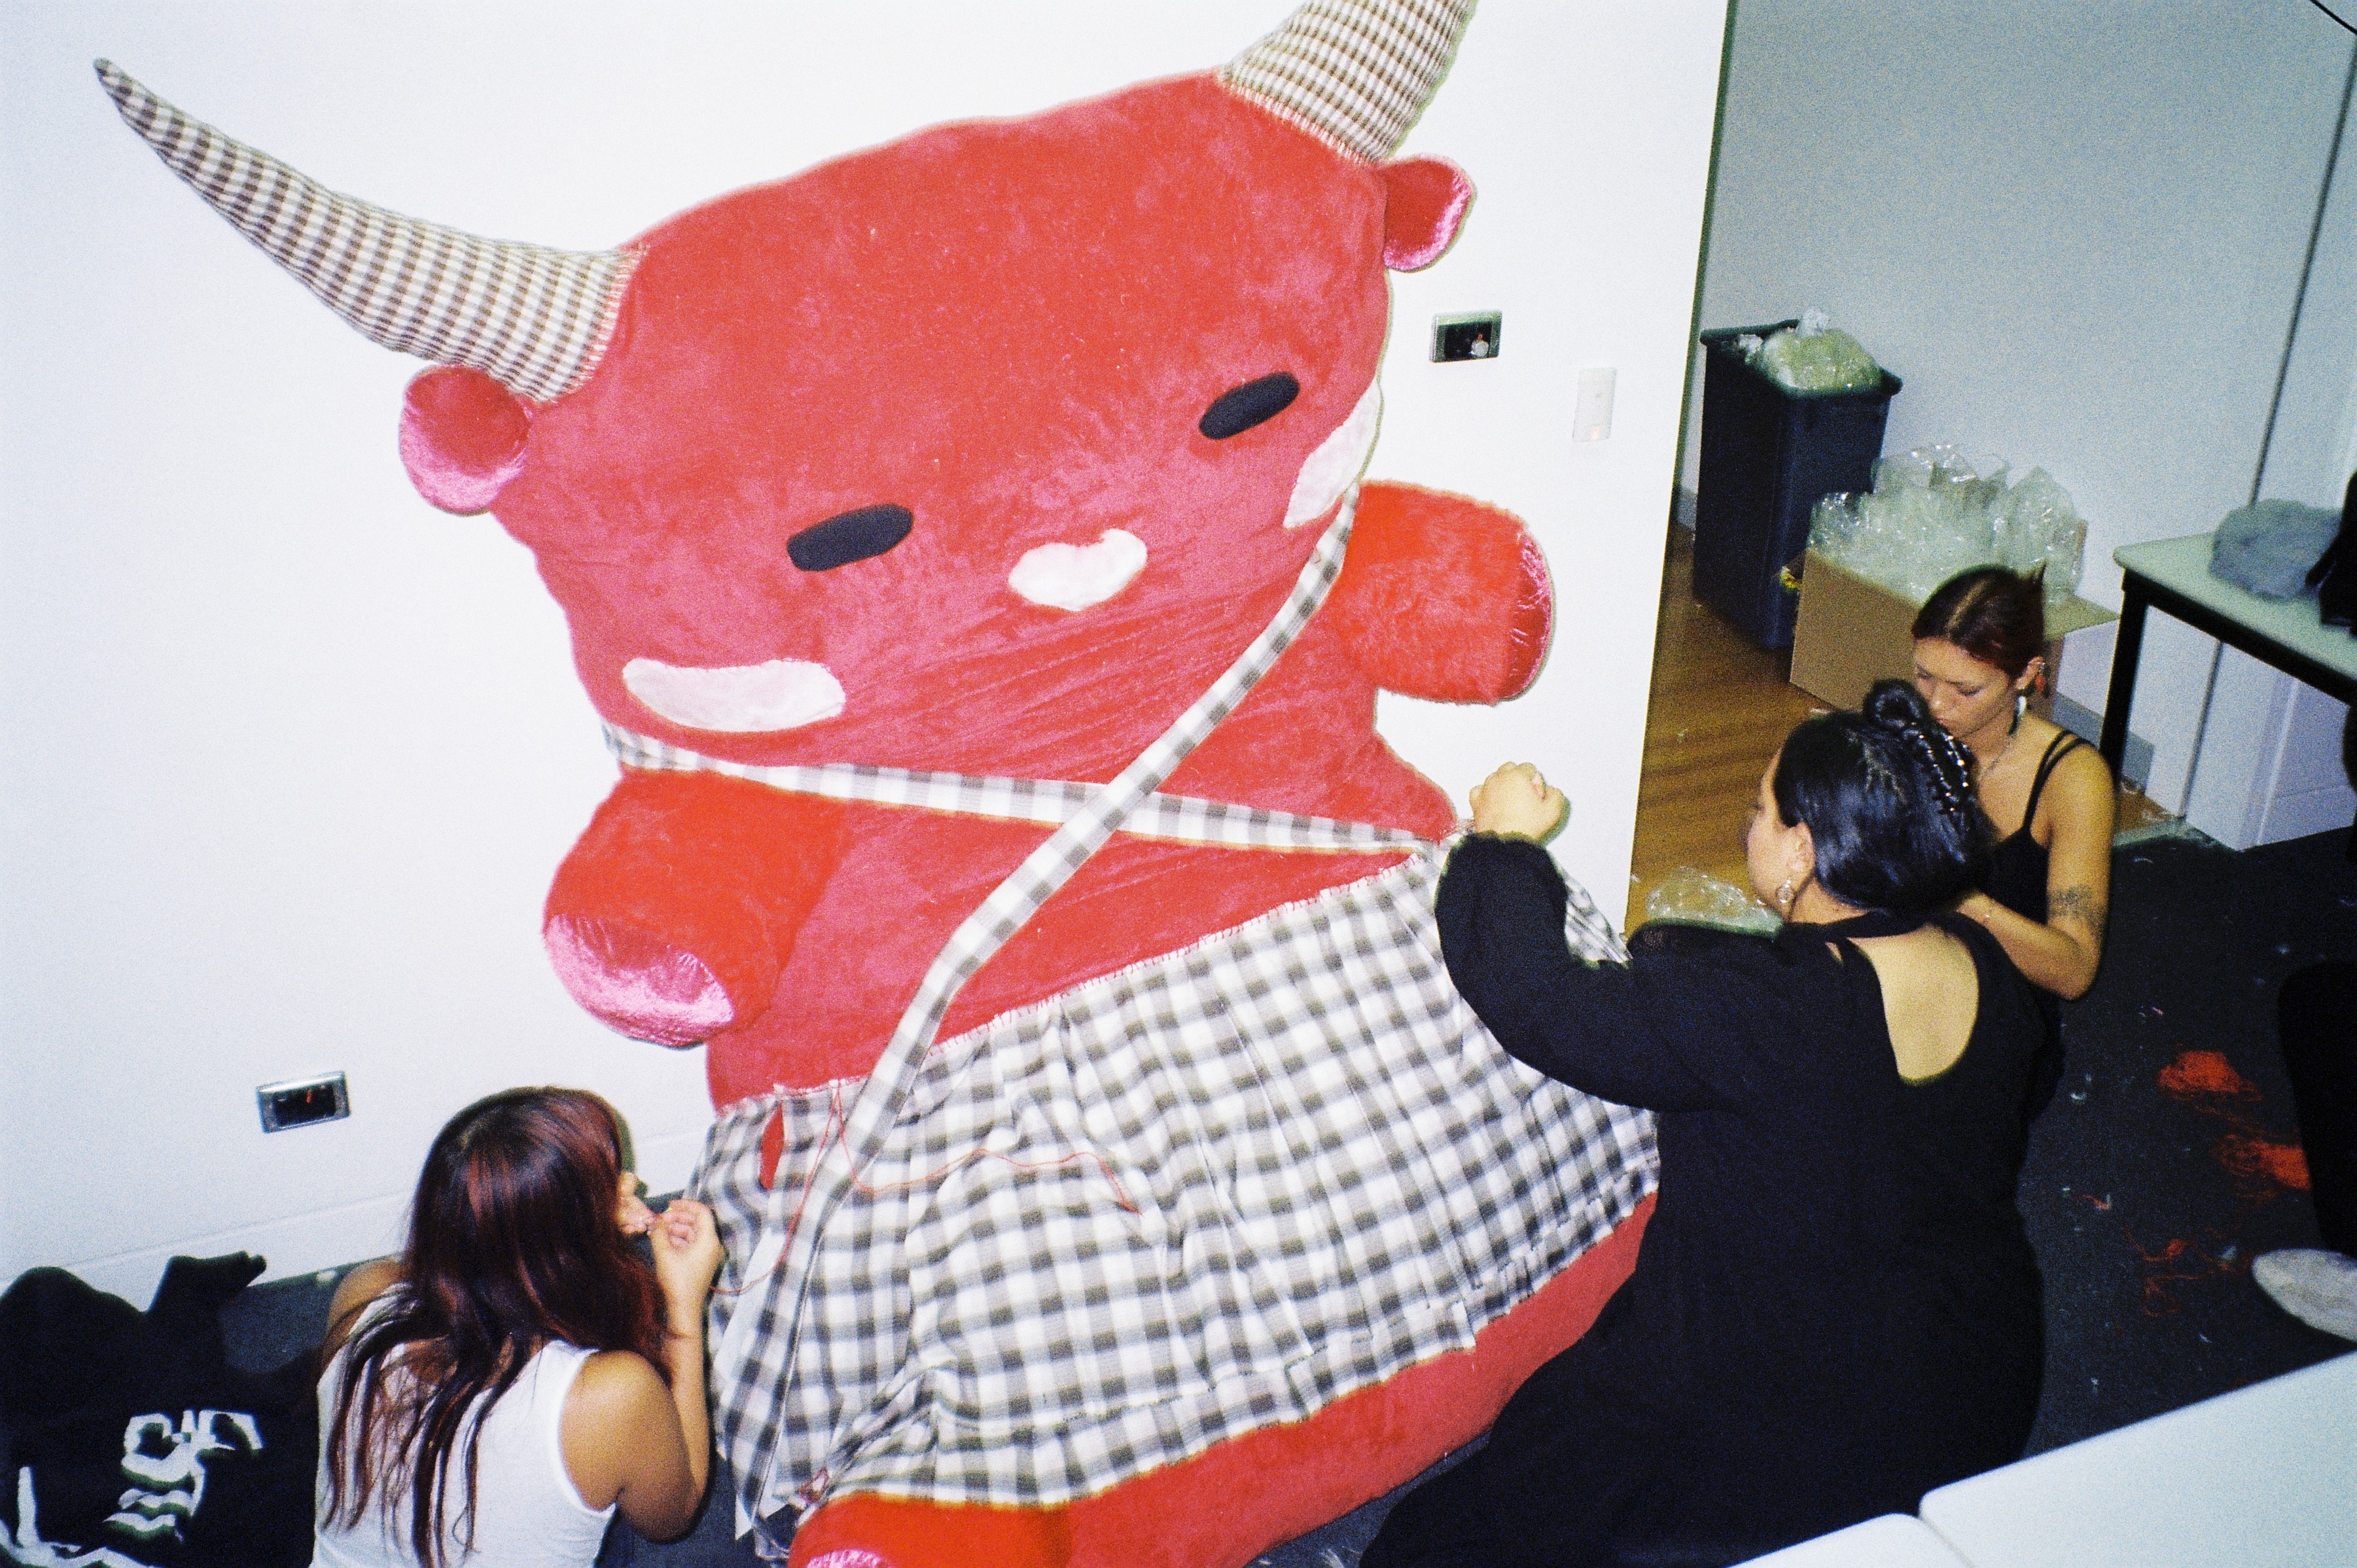 A large red soft toy with people around it